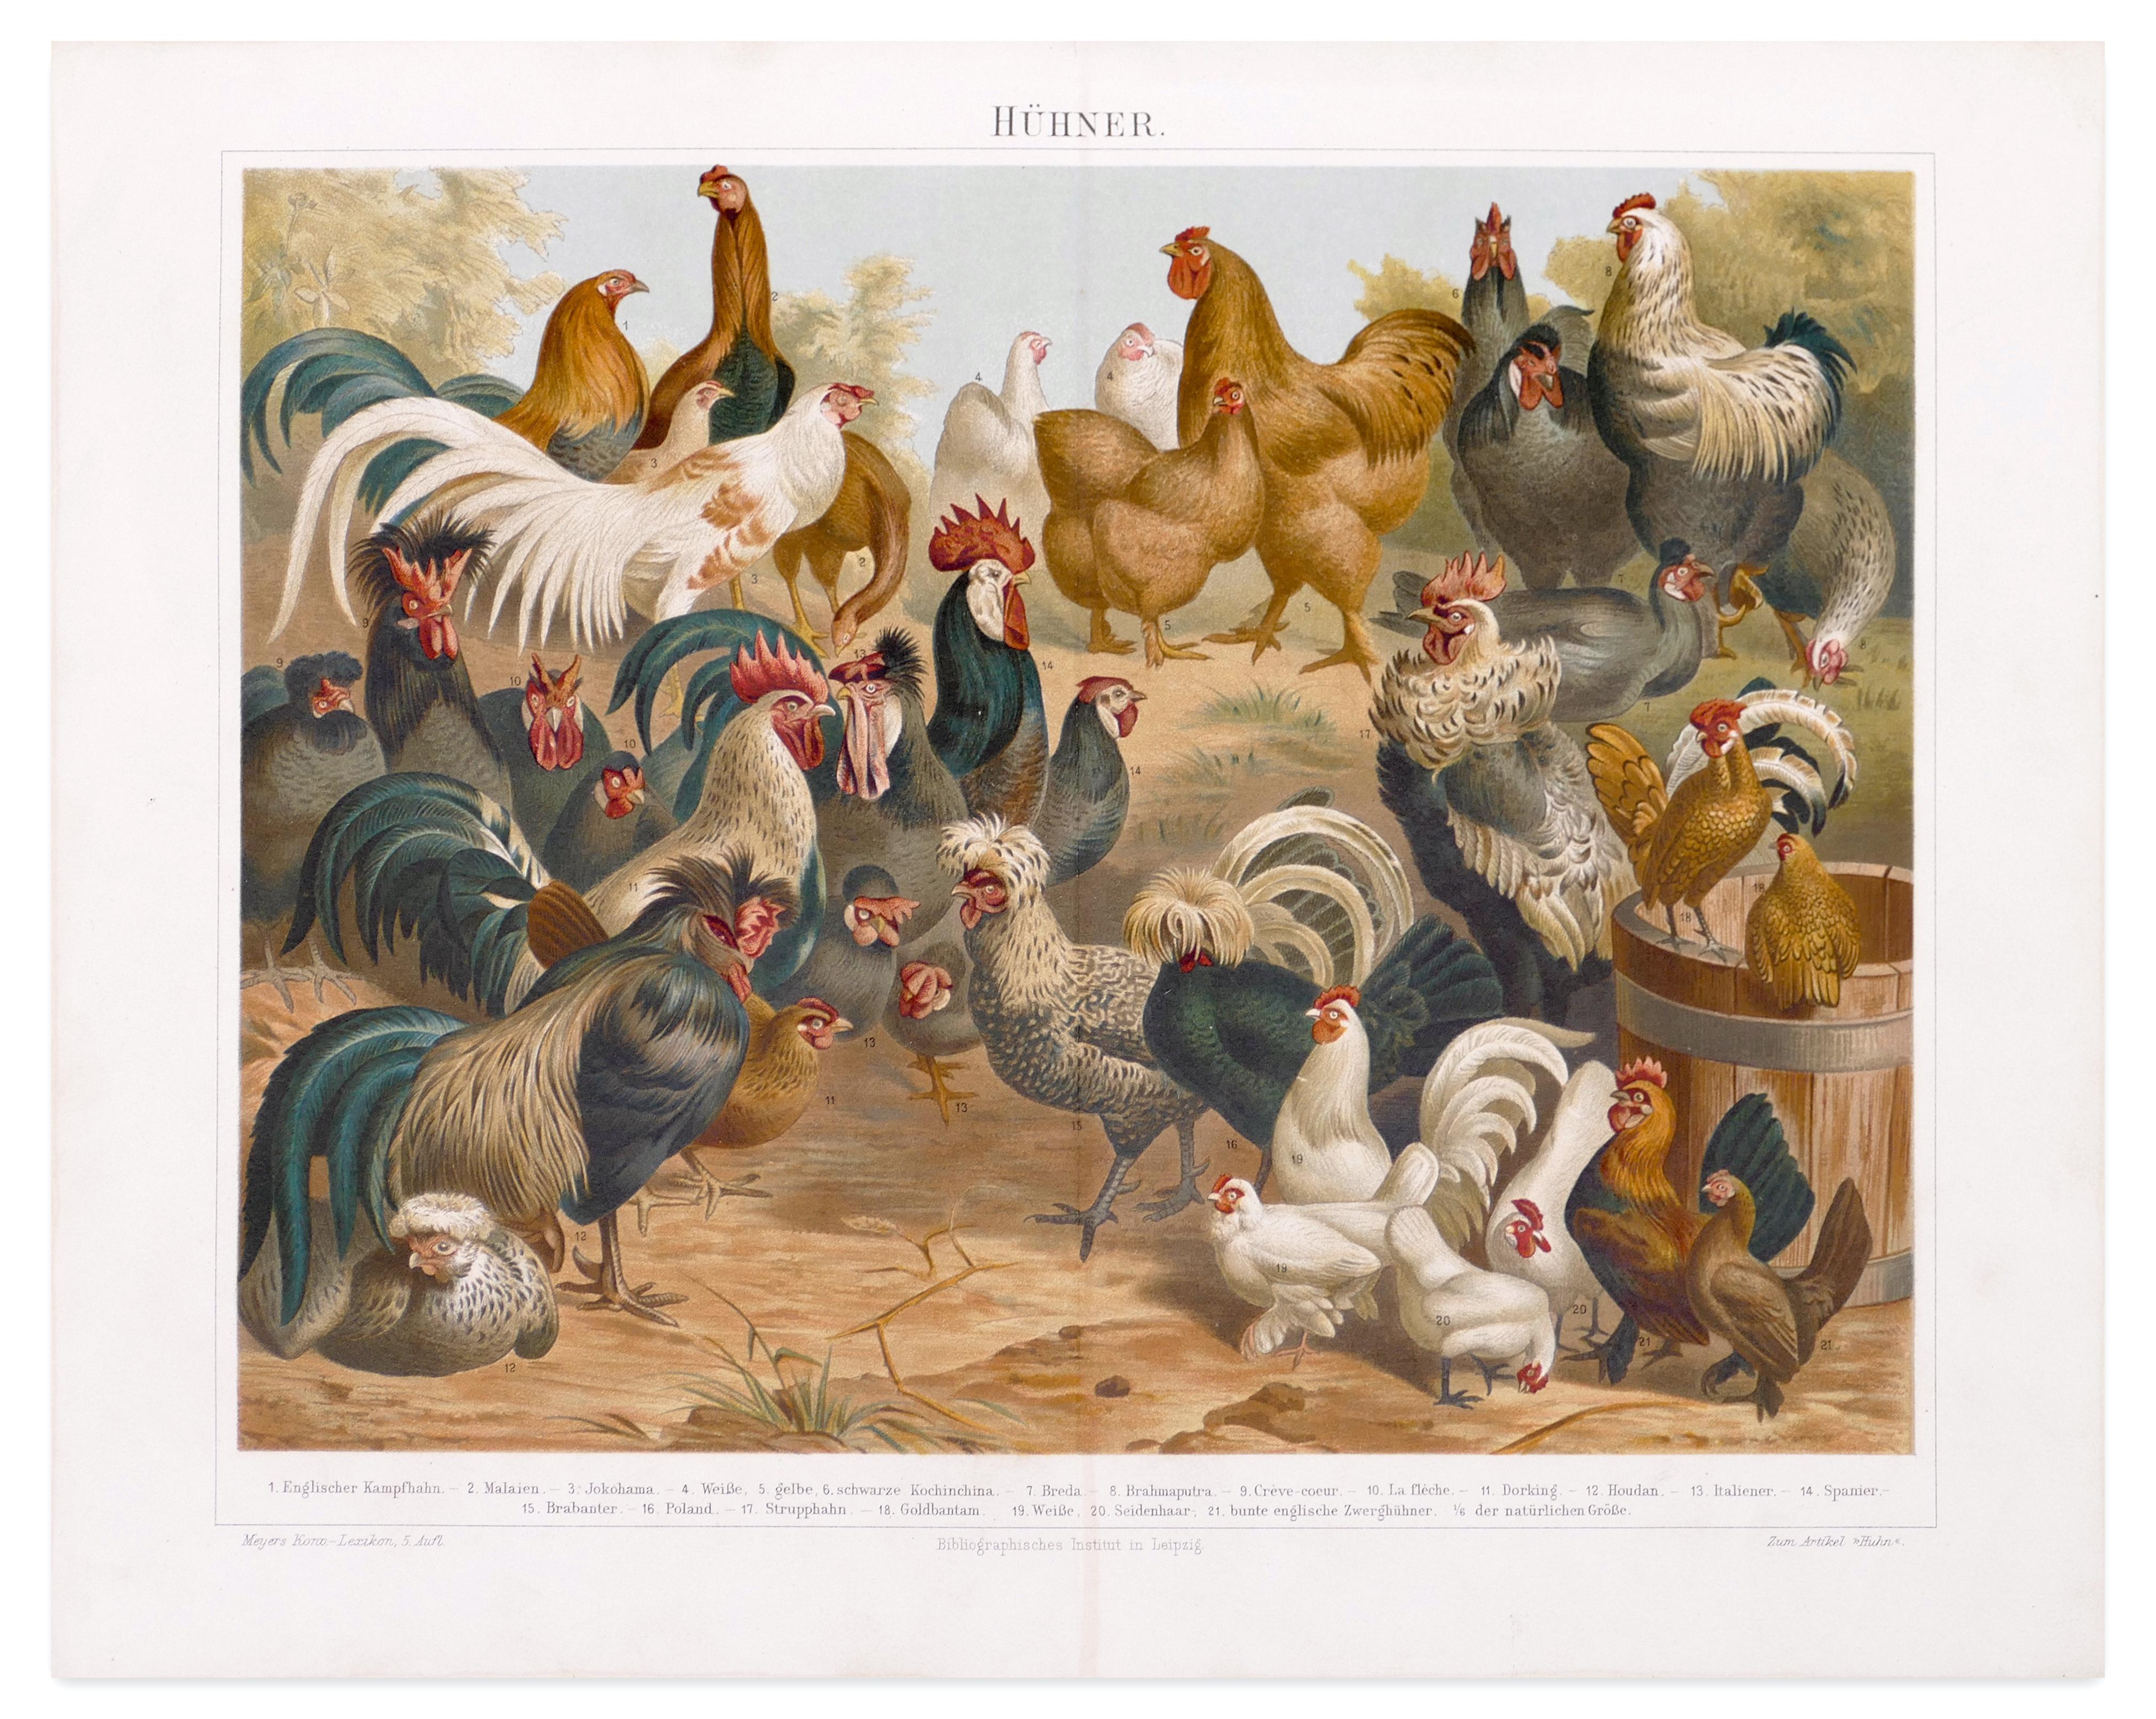 Unknown Figurative Print - Chicken and Hens - Original Lithograph - Late 19th Century